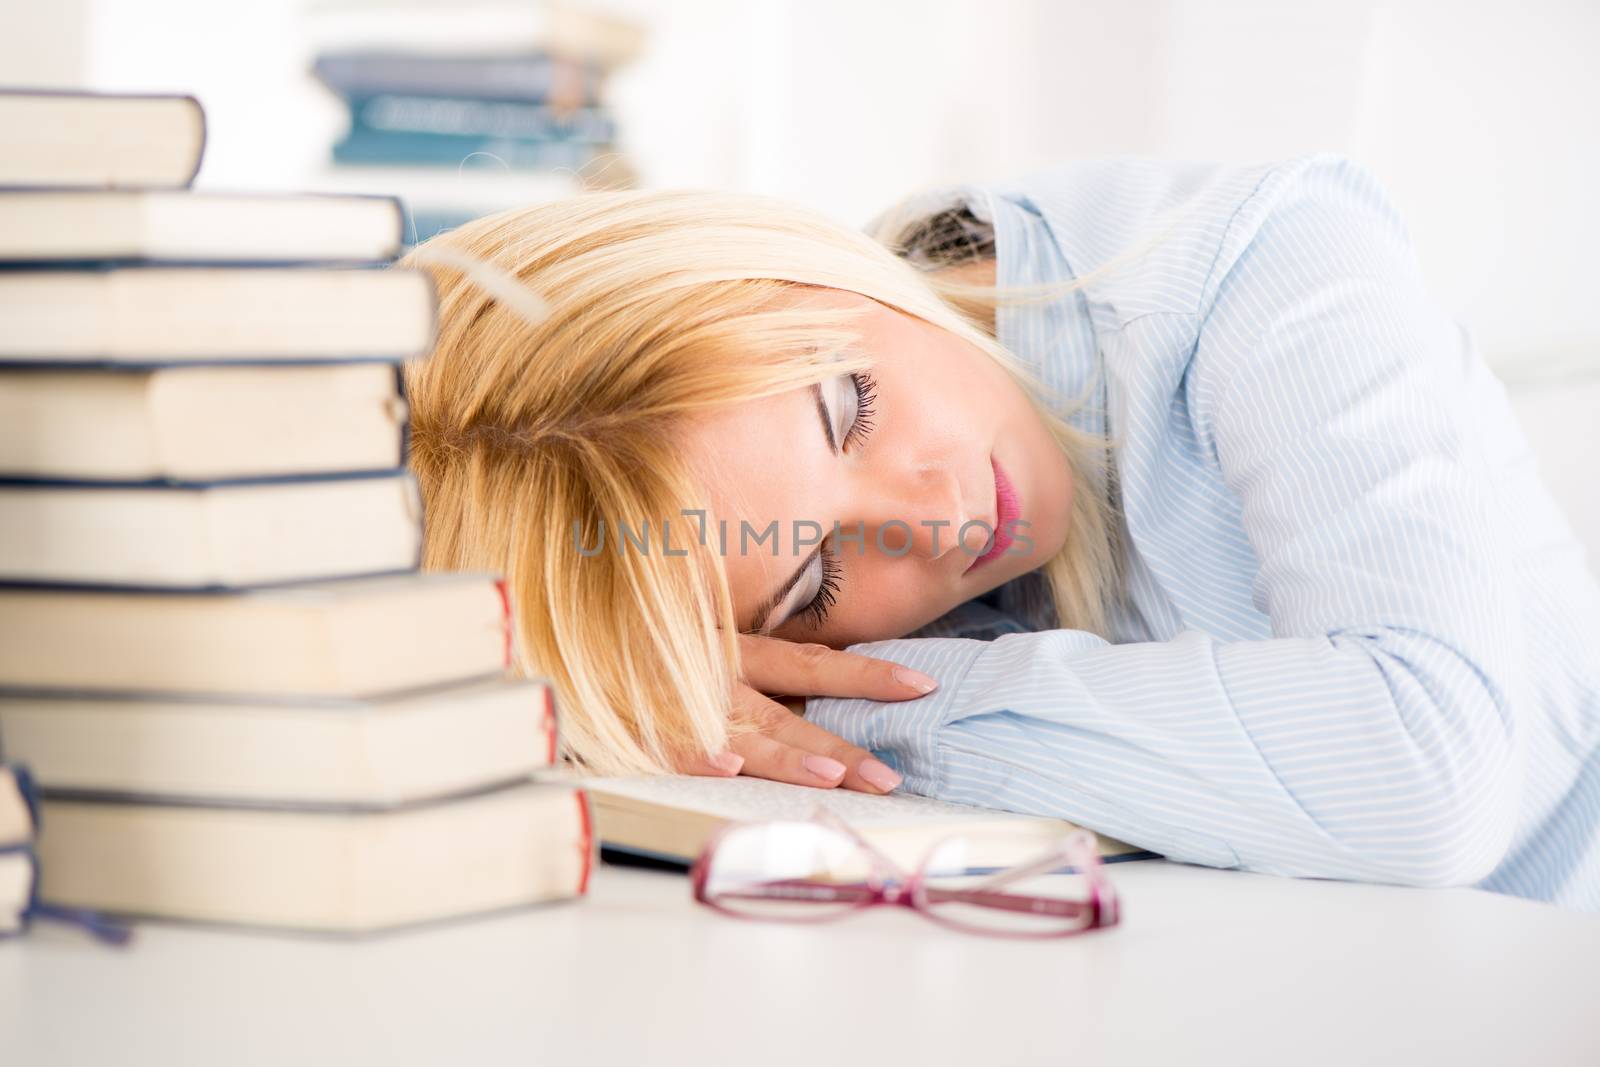 Tired student fell a sleep between many books, while learning.